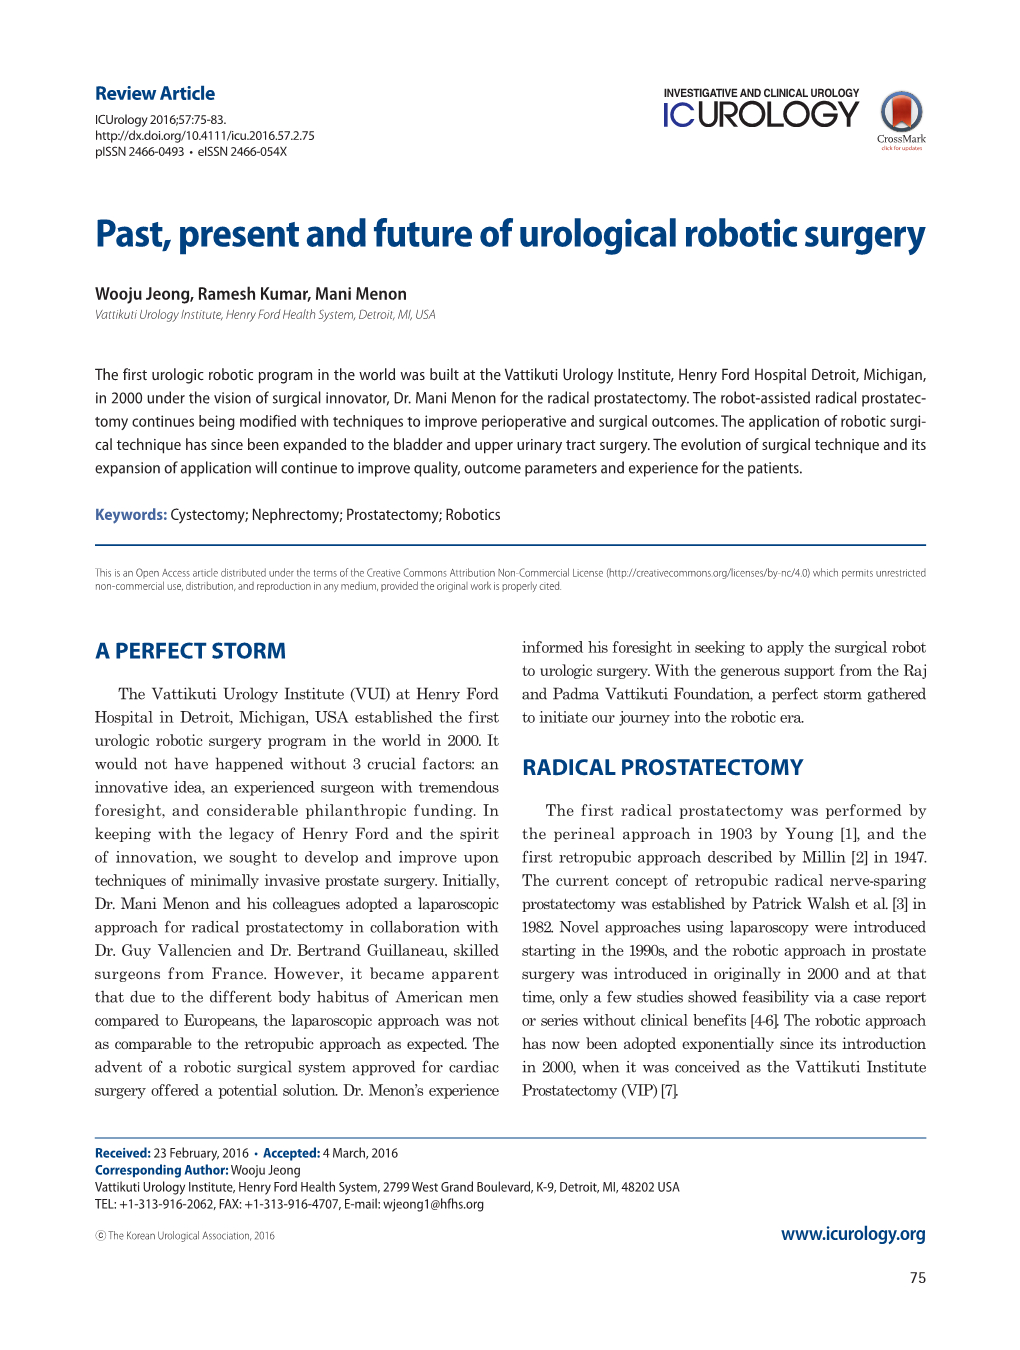 Past, Present and Future of Urological Robotic Surgery